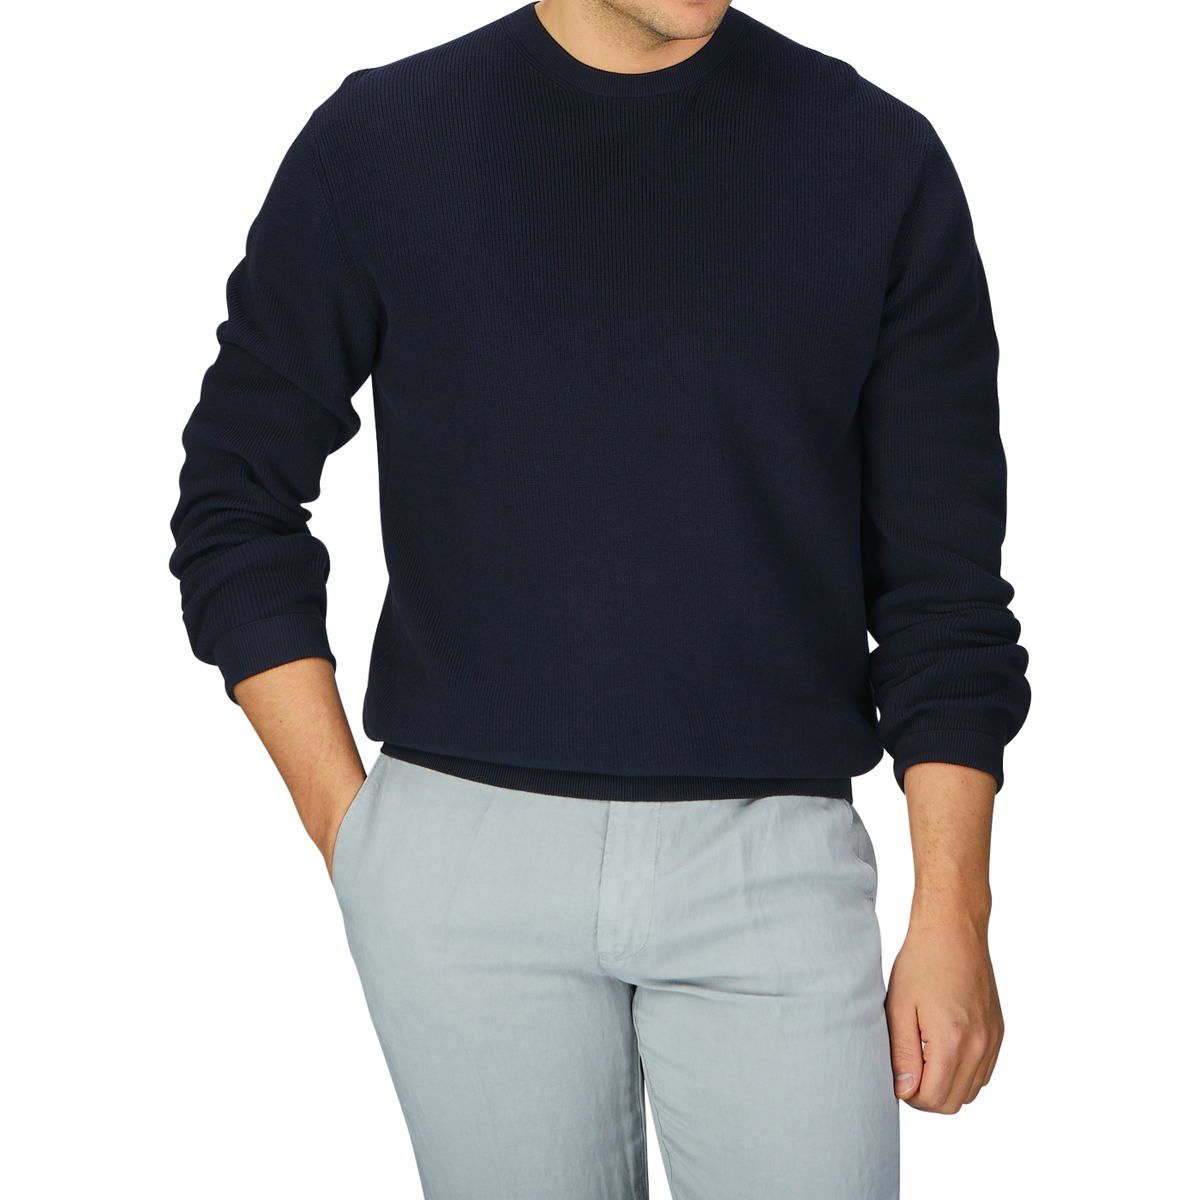 A man wearing an Aspesi navy blue knitted cotton sweater and grey pants.